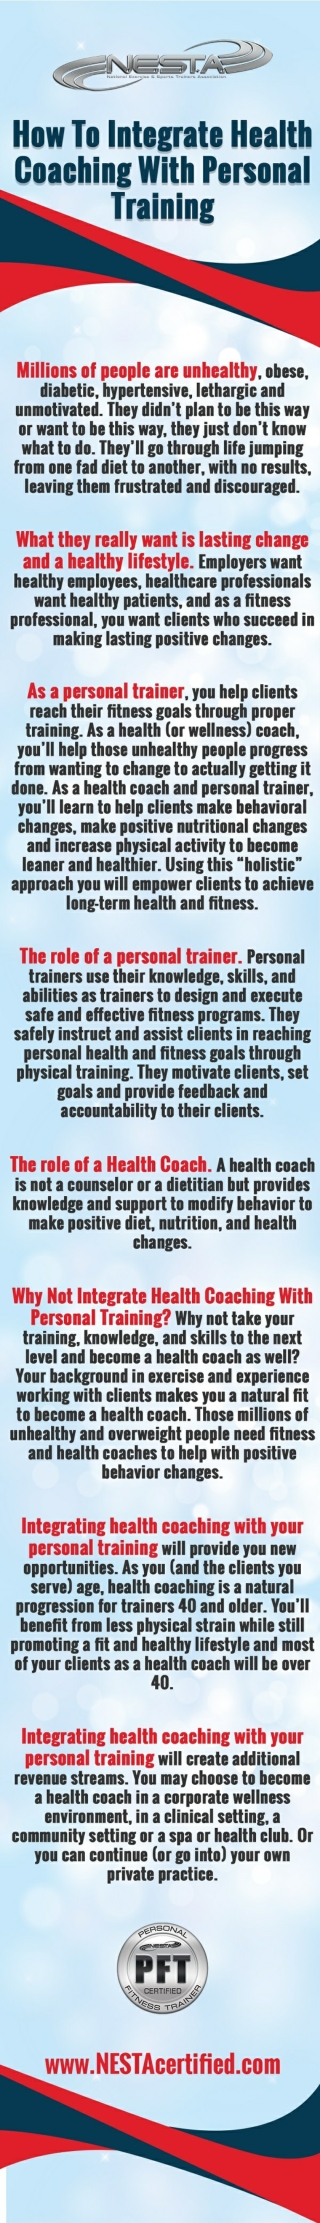 How to Combine Health Coaching and Personal Training in Business